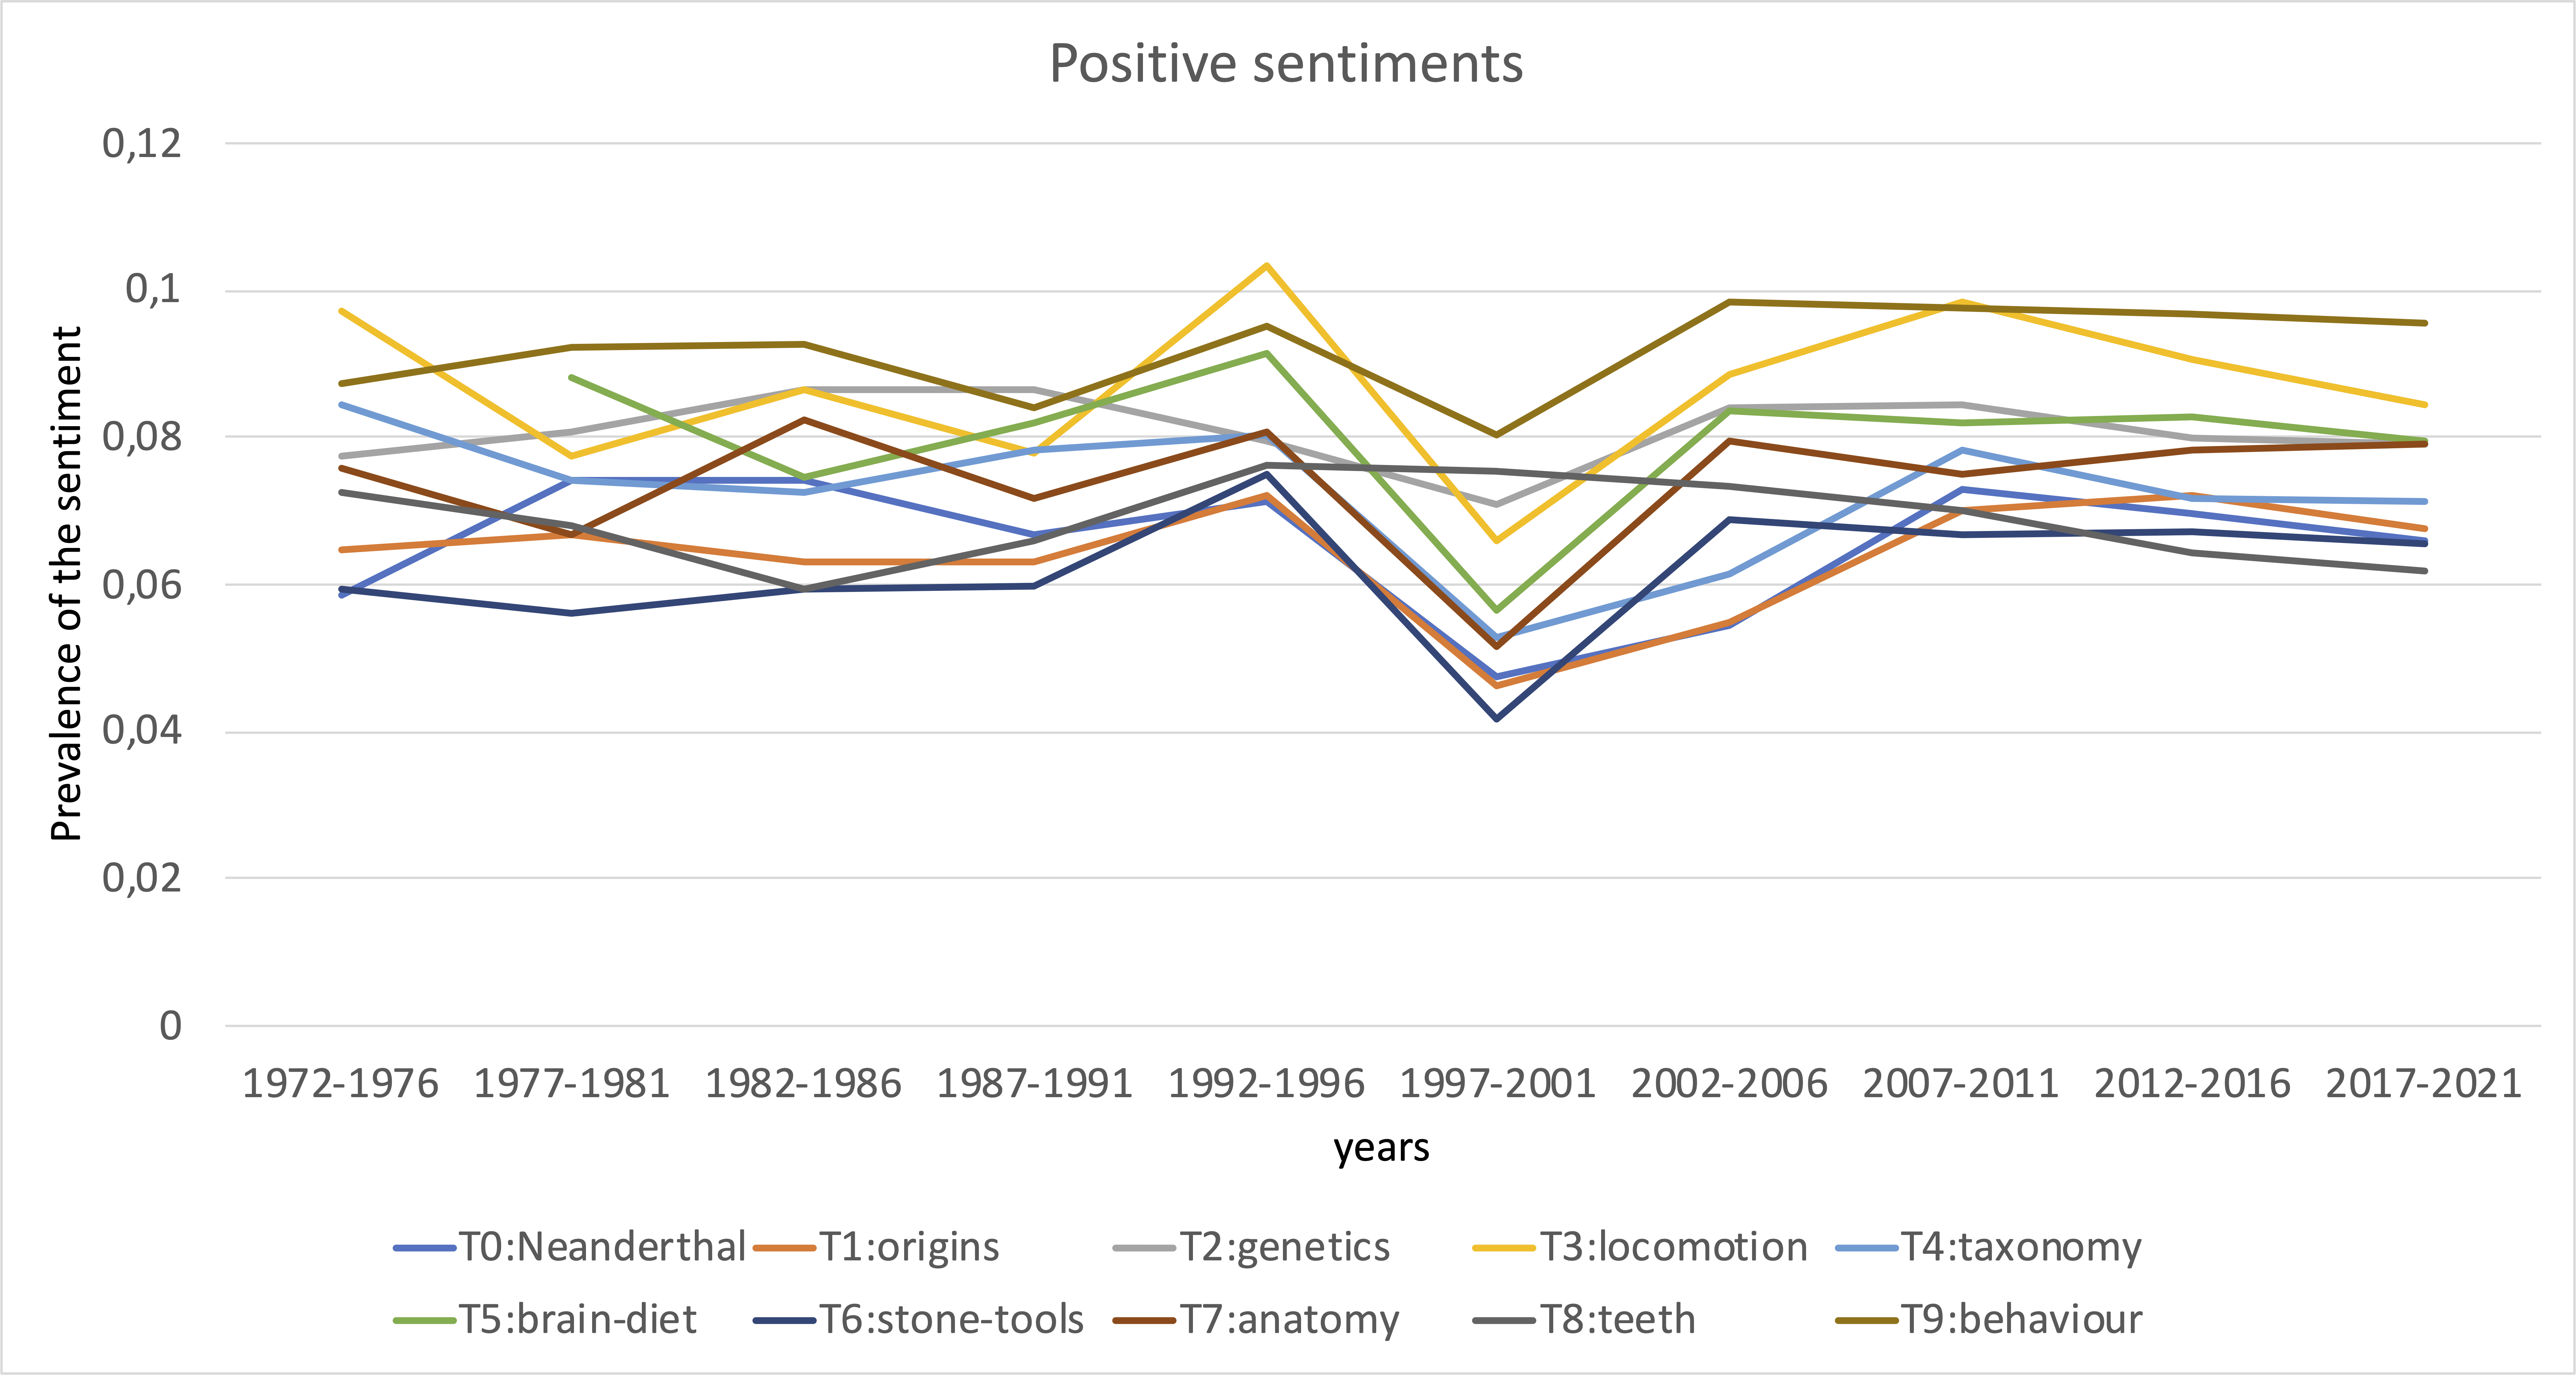 Prevalence of positive sentiments over the years